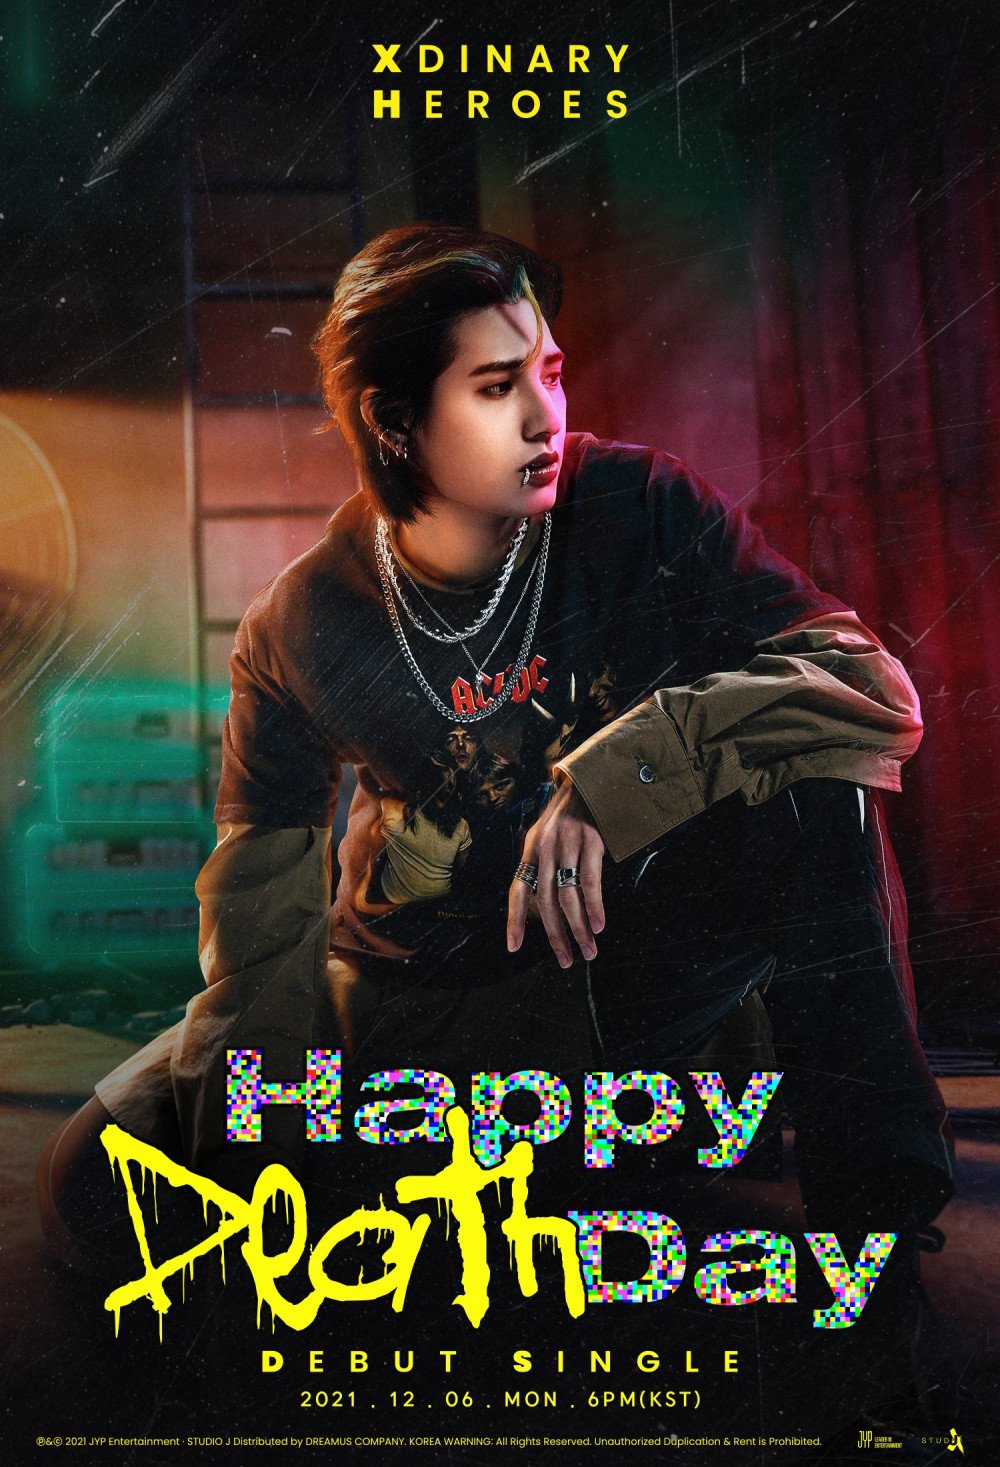 Xdinary Heroes reveals Jooyeon's individual teaser image for debut single 'Happy Death Day'